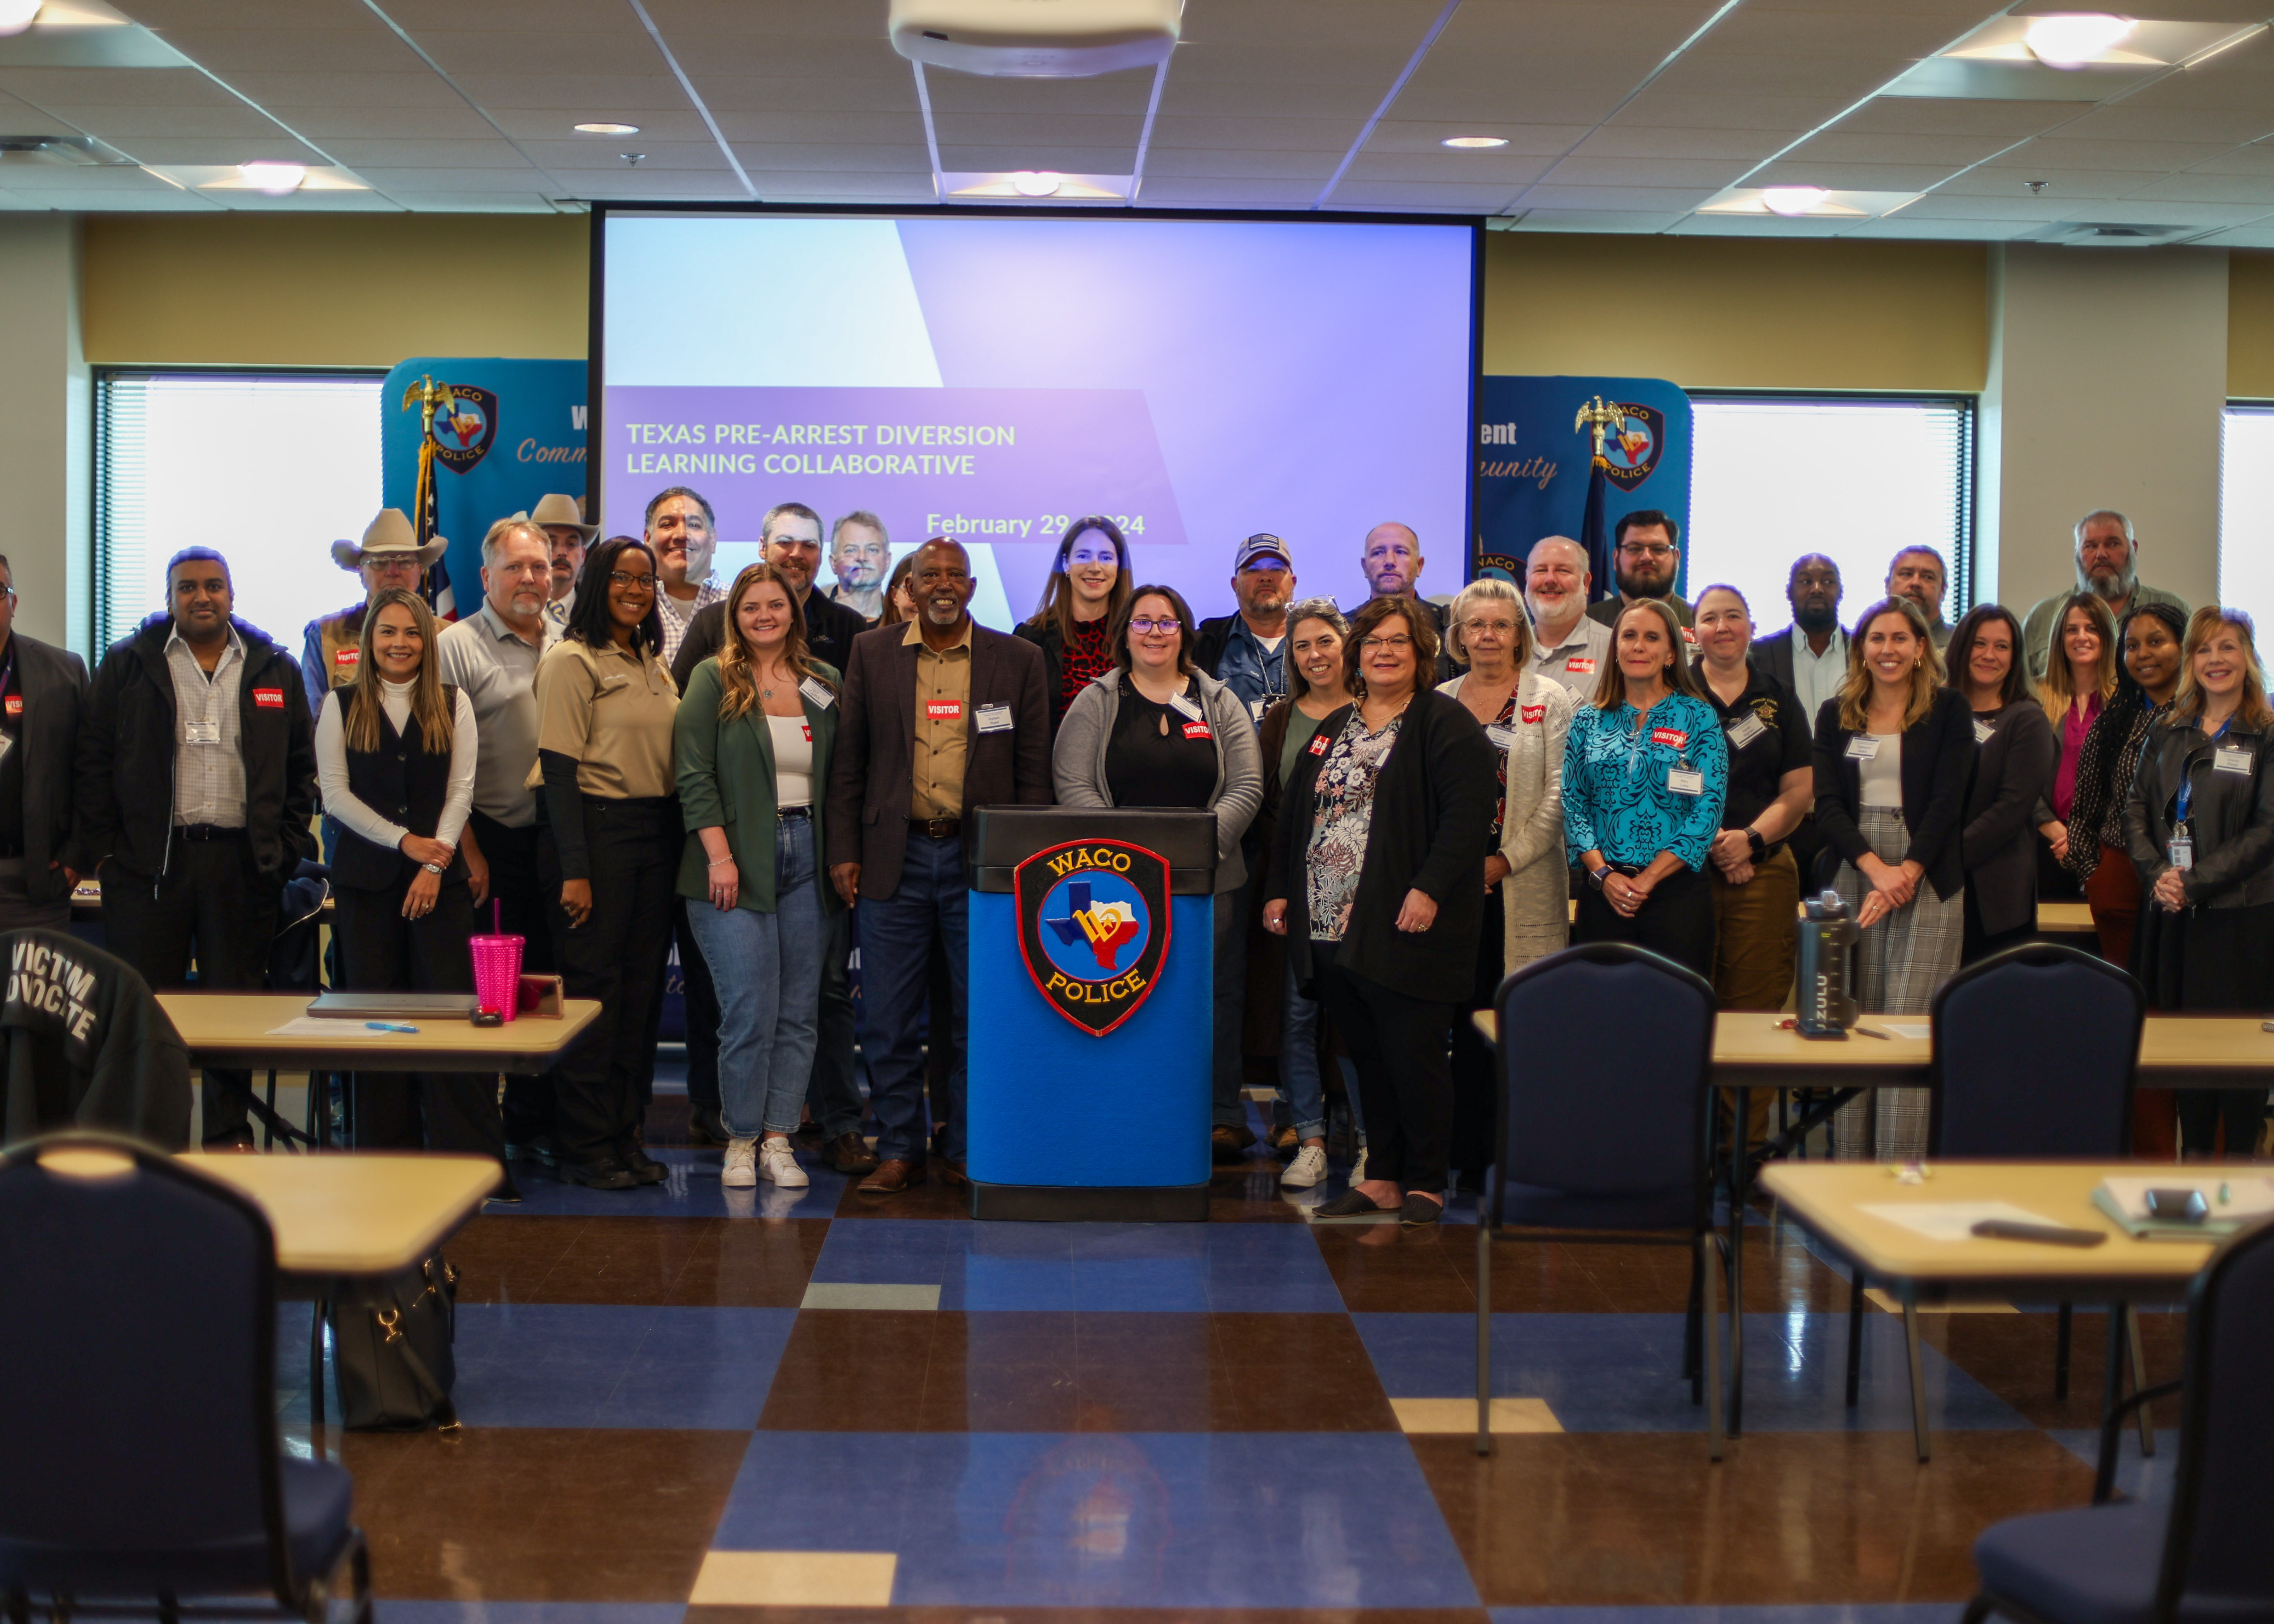 A group photo of attendants at the Pre-Arrest Diversion Learning Collaborative meeting.